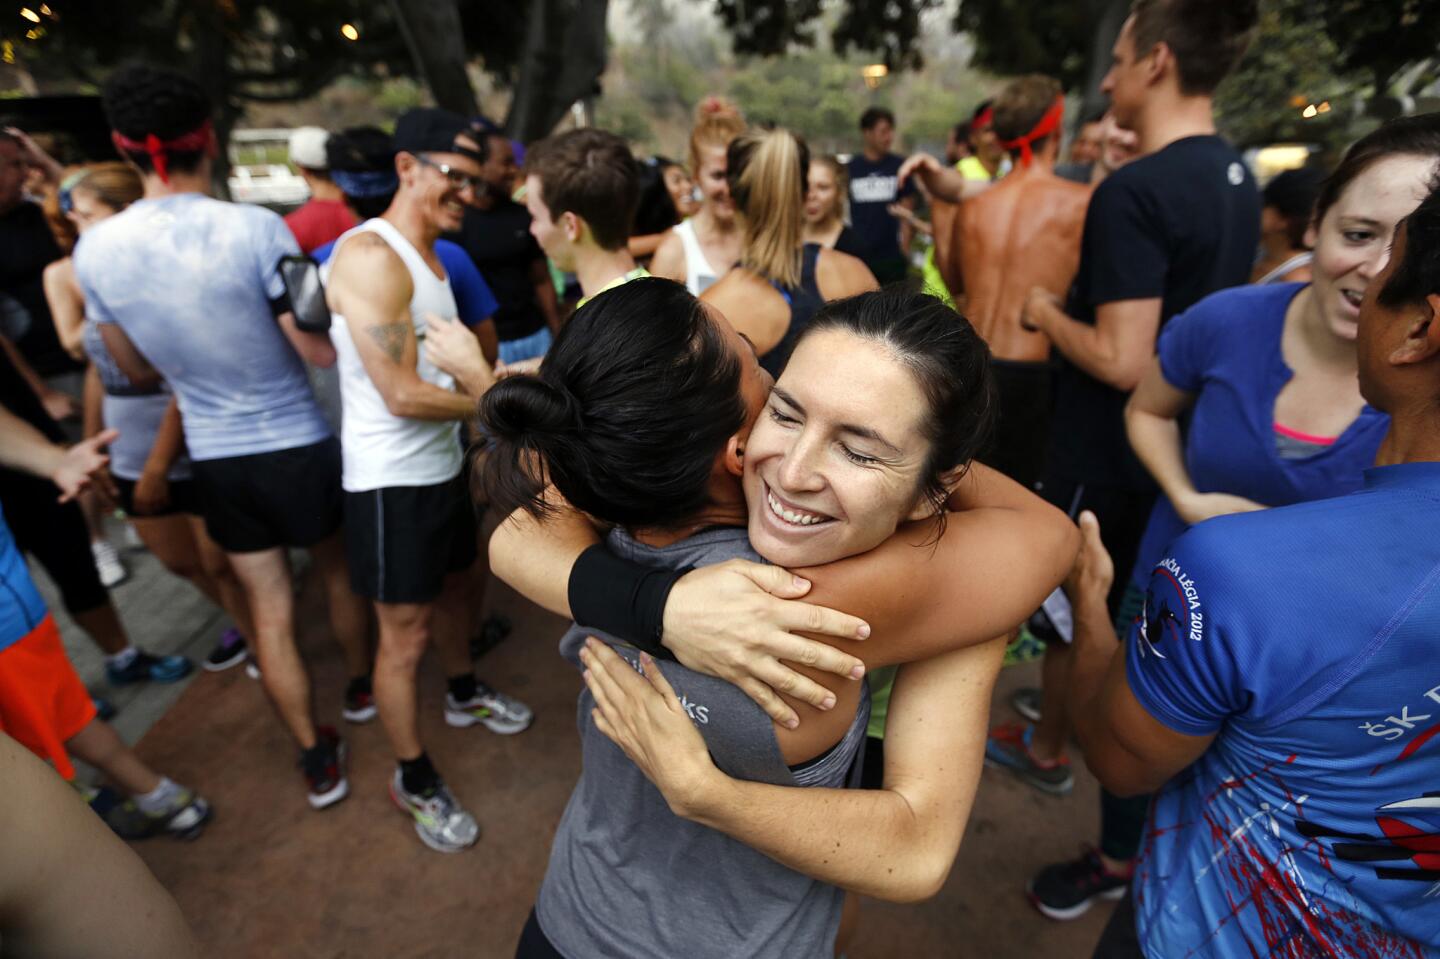 Runners gather at the Hollywood Bowl's box office to start with warm-ups and hugs in a show of camaraderie and encouragement before running the Bowl's steps with November Project L.A., a free fitness group that gathers year-round.